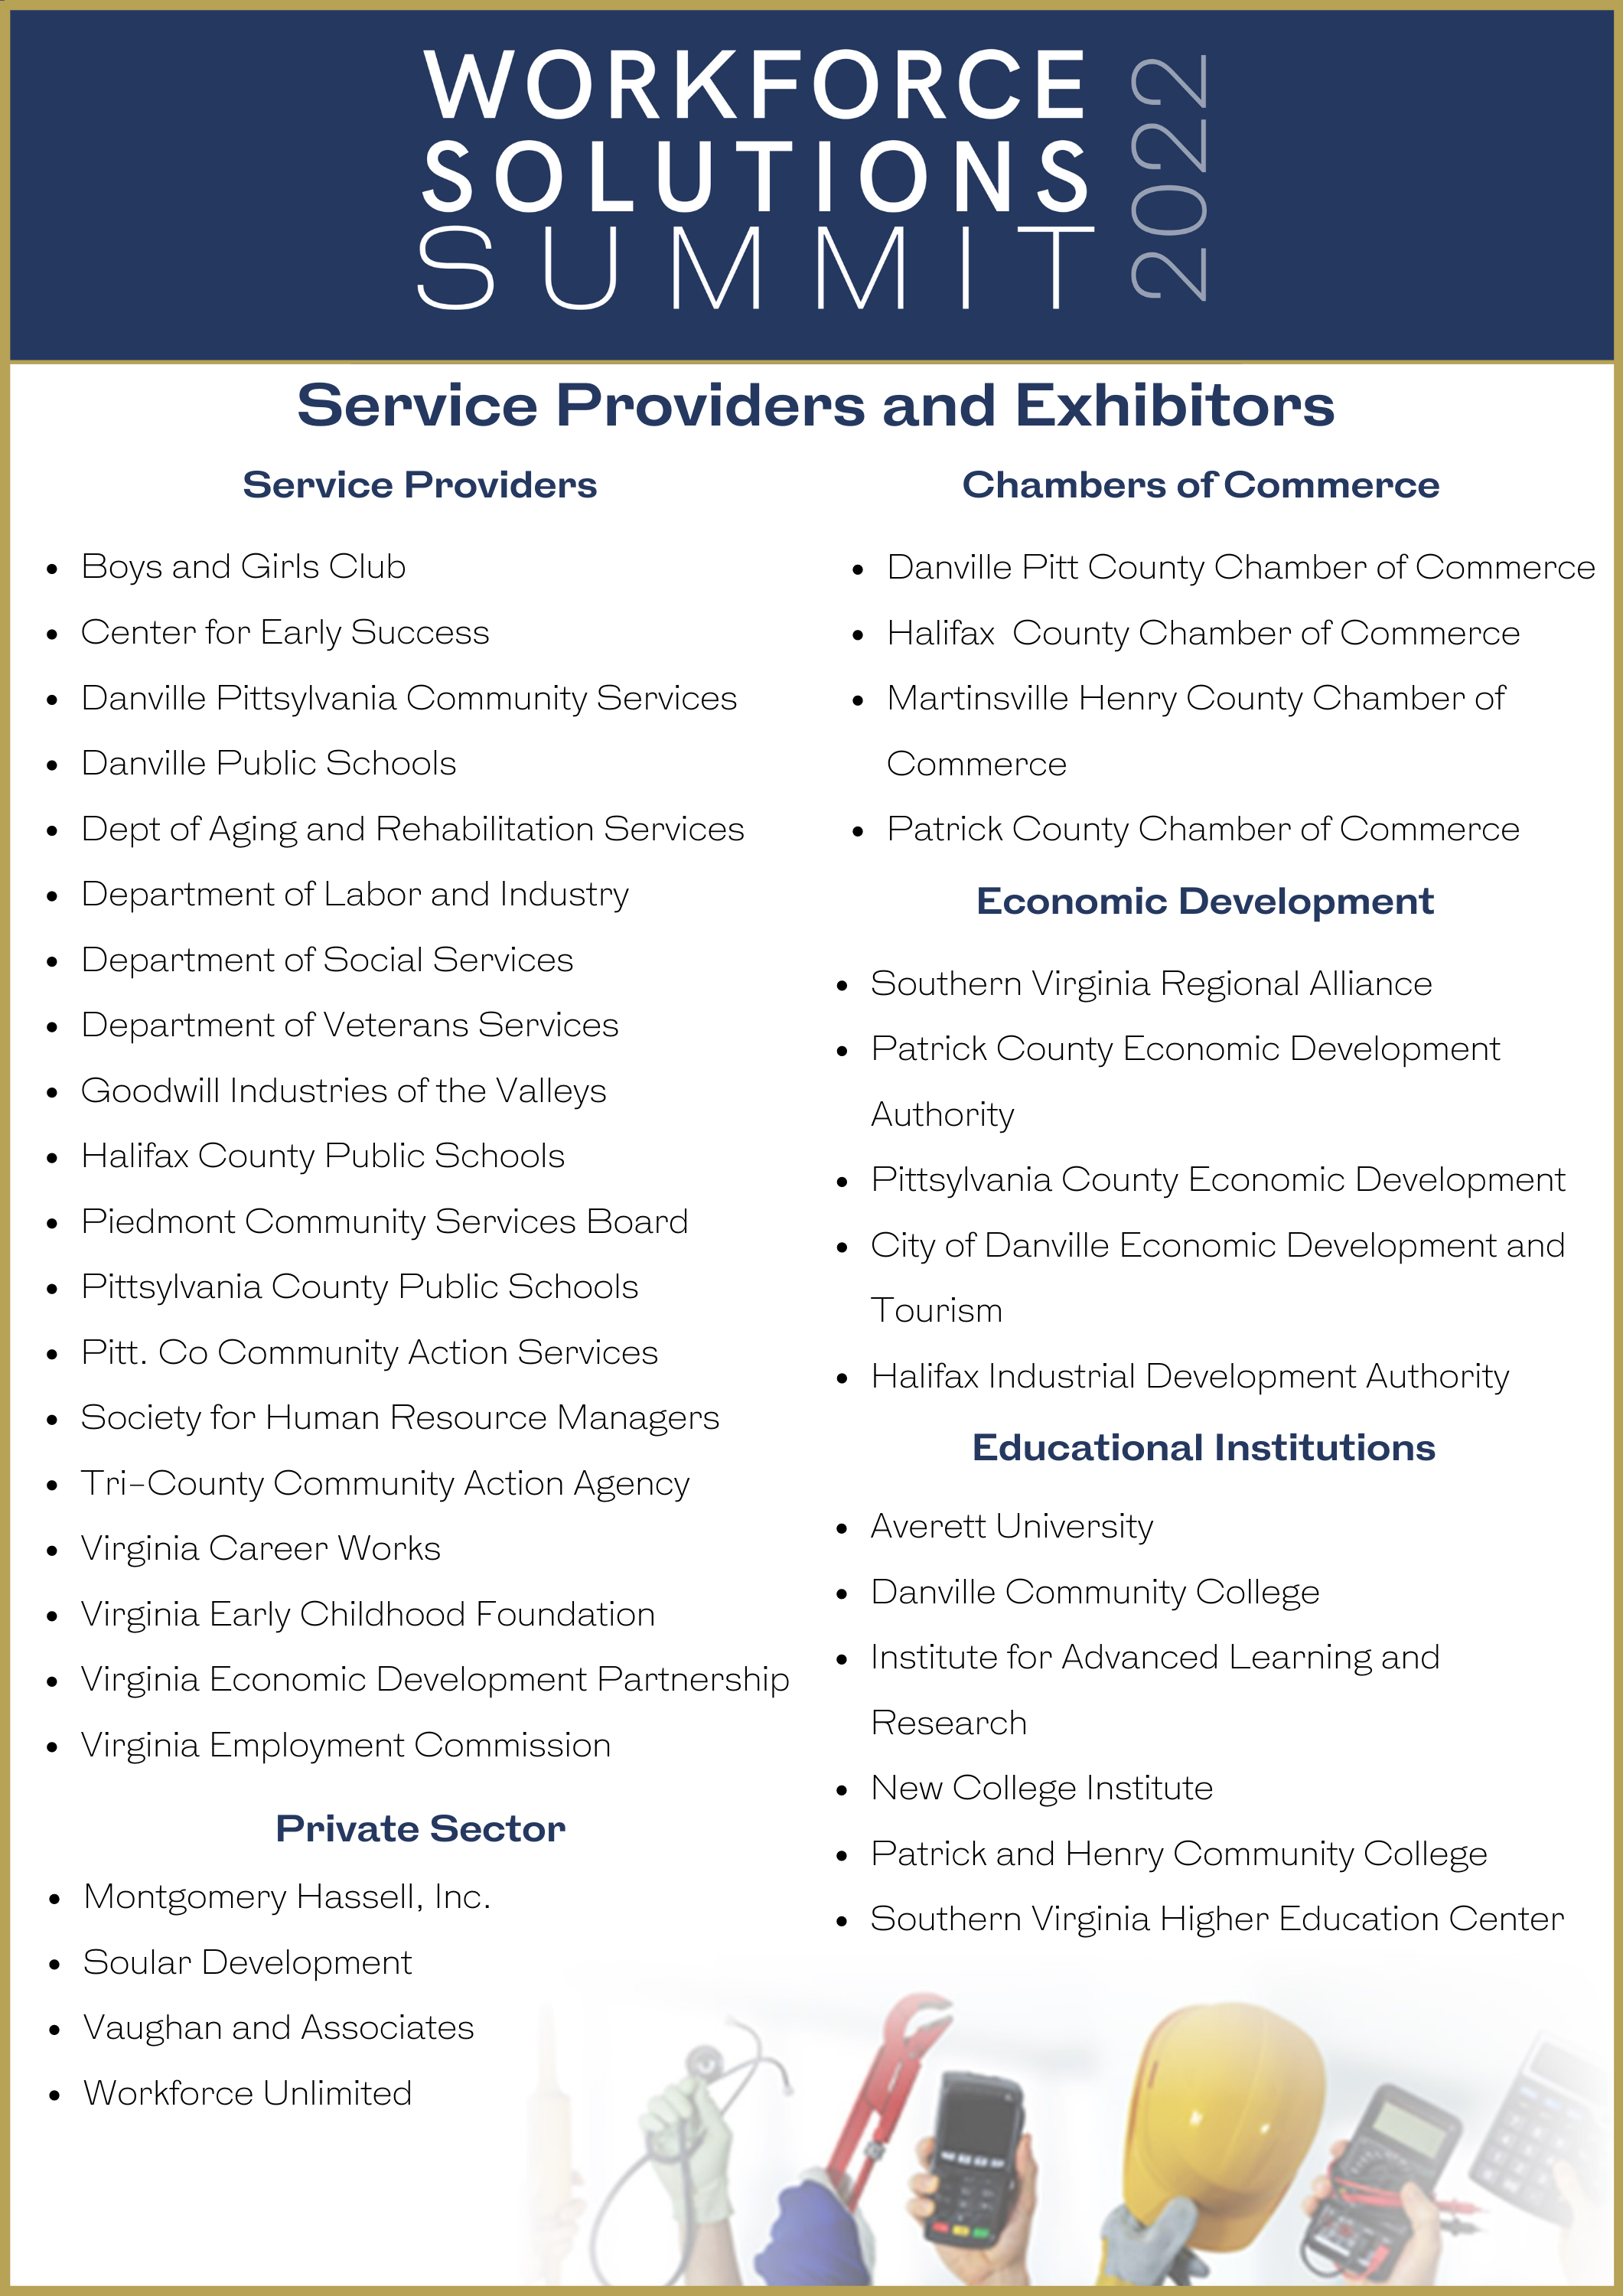 Workforce Solutions Summit Service Providers and Exhibitors